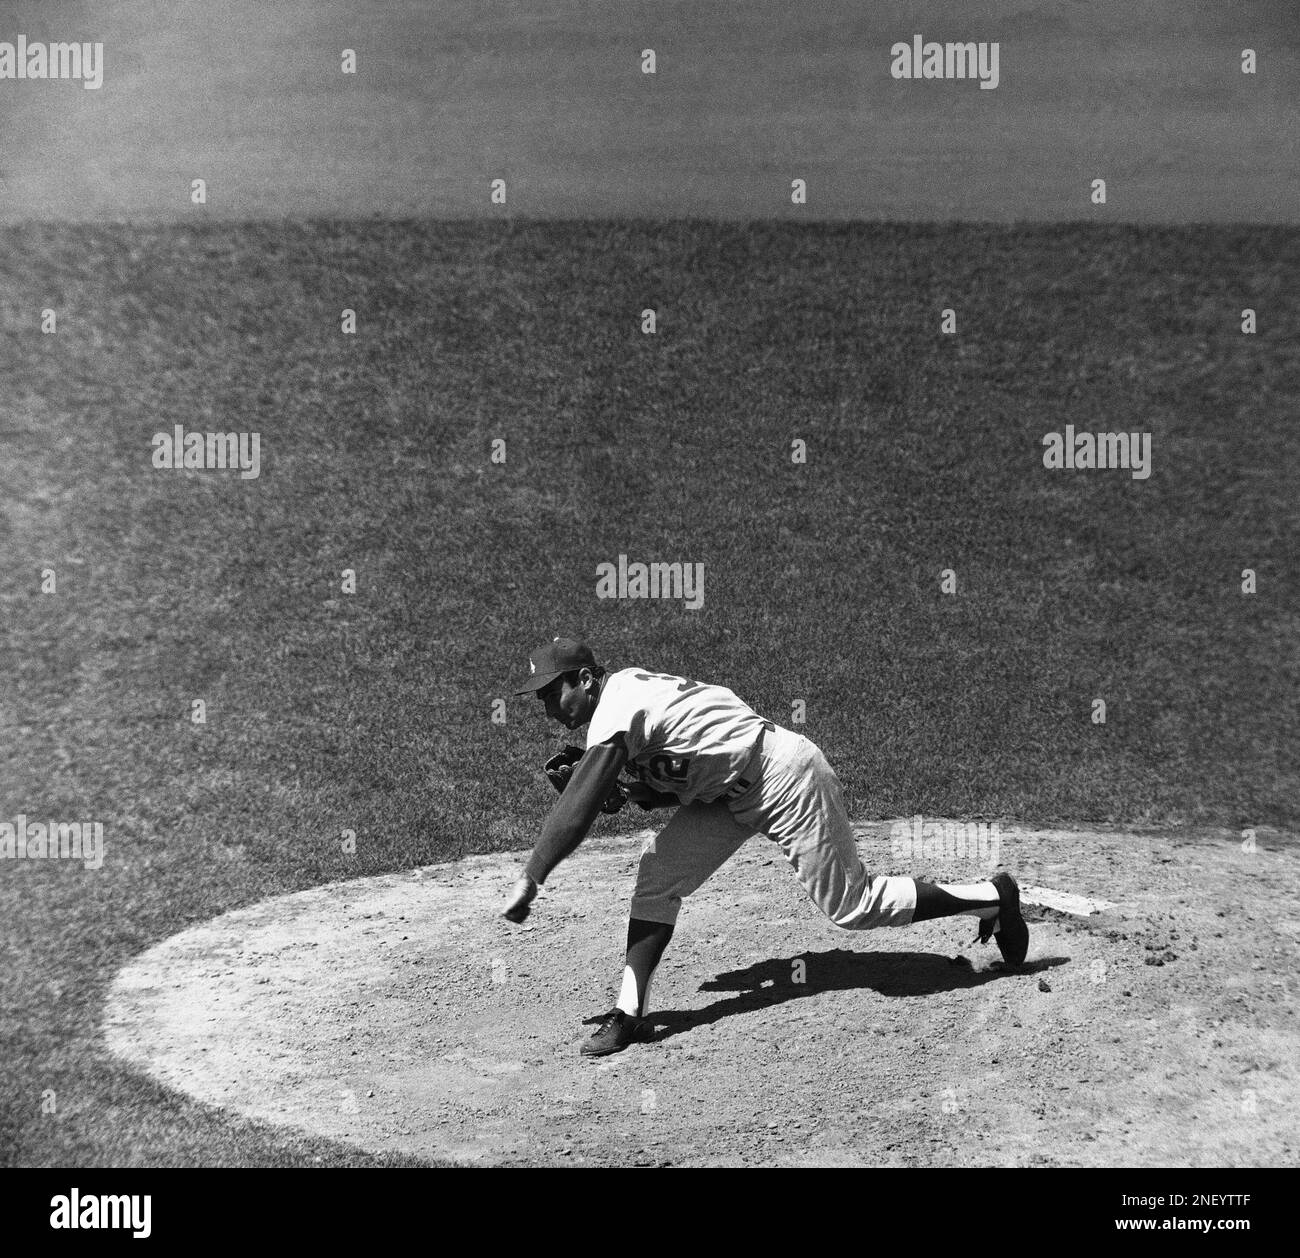 Sandy Koufax of Los Angeles Dodgers bears down as he hurls against Chicago  Cubs on April 22, 1966 in Chicago, completing his first full game of the  new season. He struck out